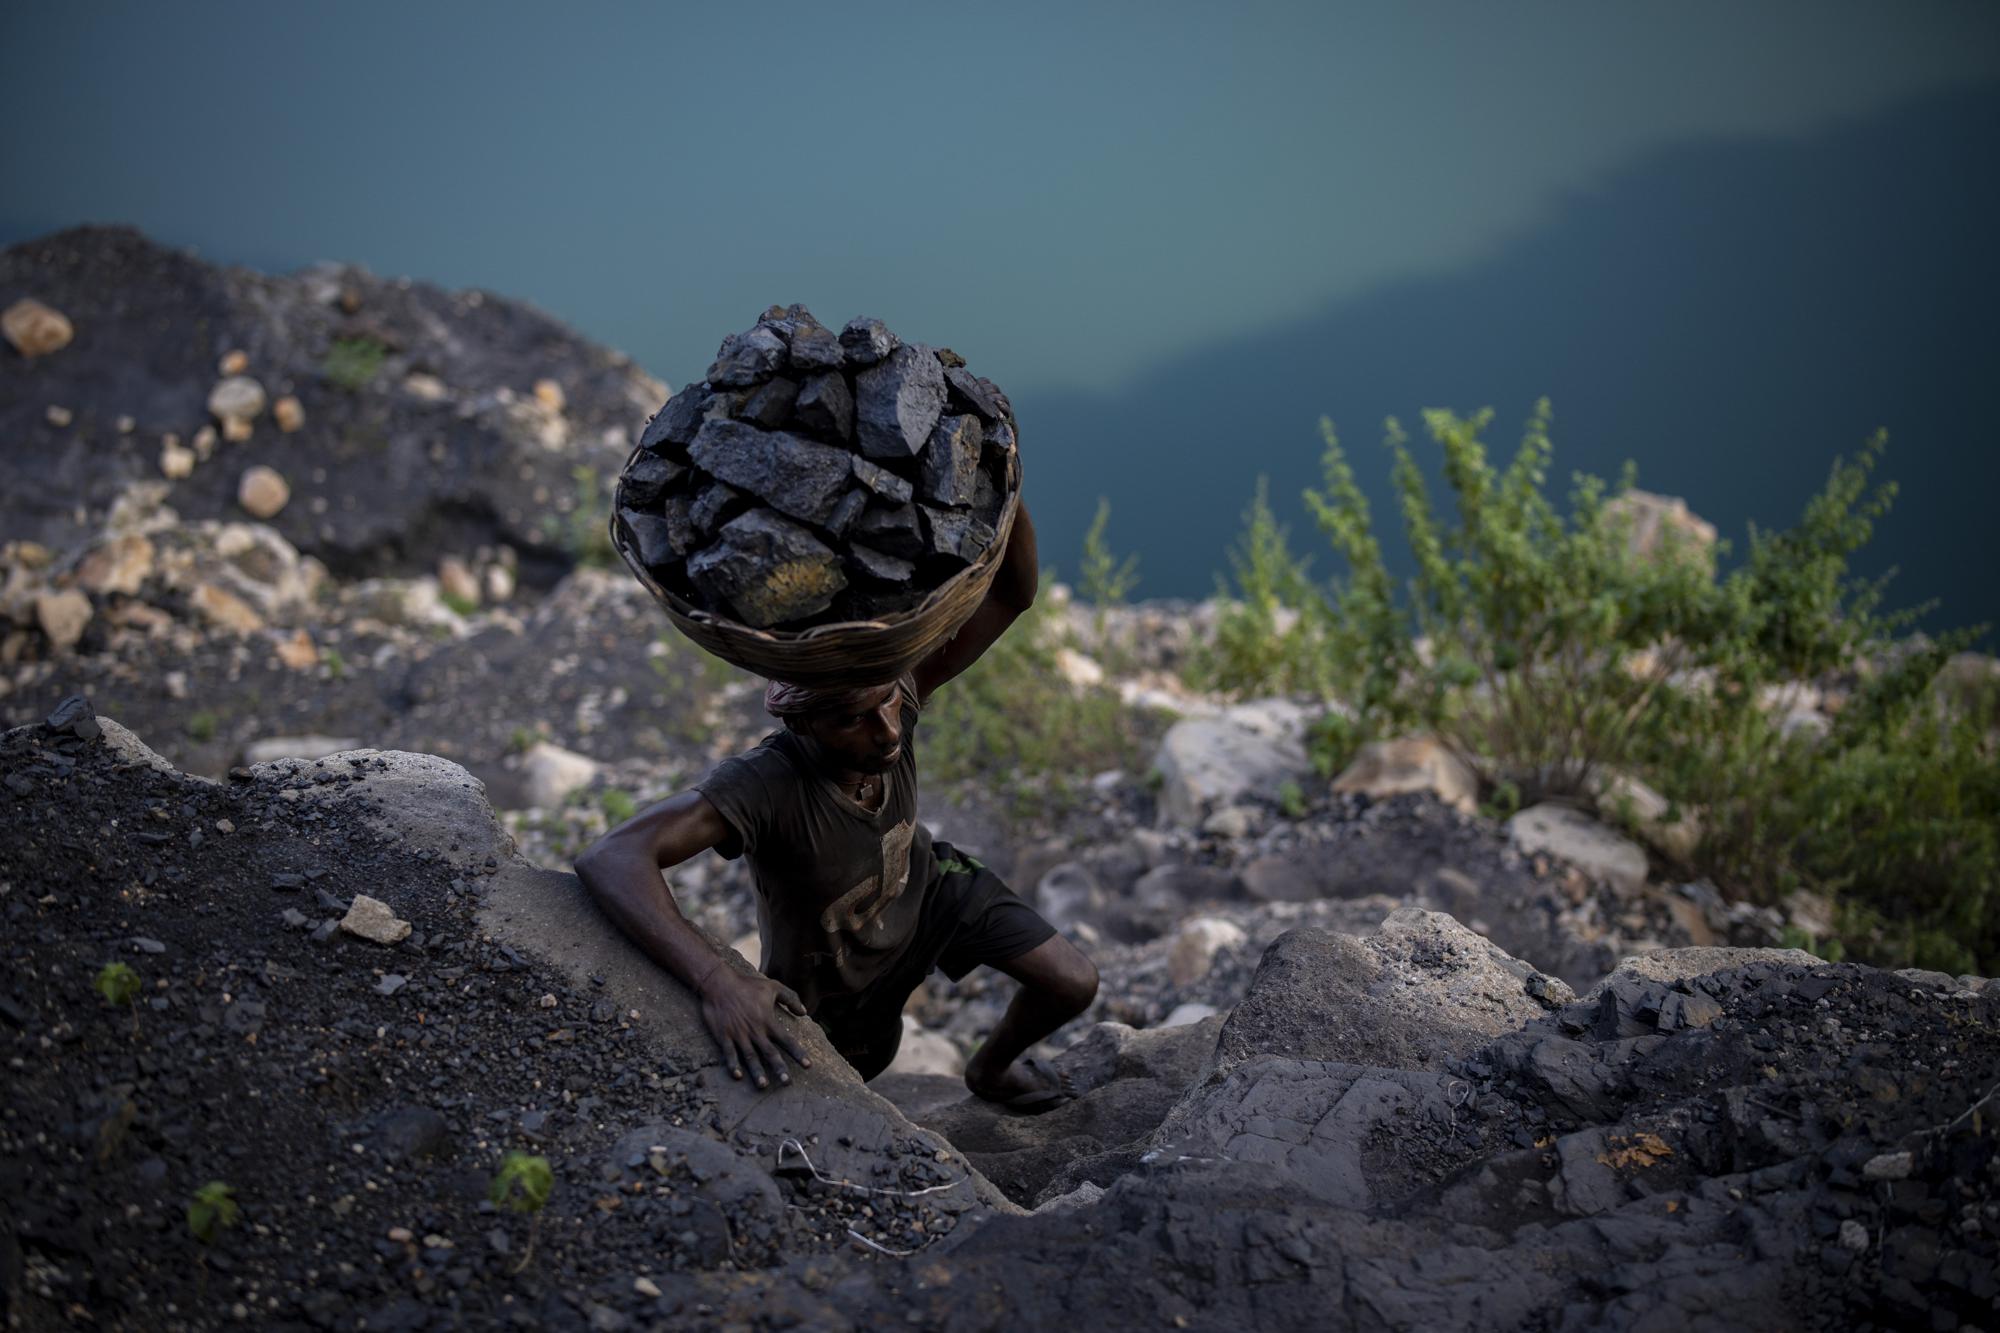 A man climbs a steep ridge with a basket of coal scavenged from a mine near Dhanbad, an eastern Indian city in Jharkhand state, Friday, Sept. 24, 2021. A 2021 Indian government study found that Jharkhand state -- among the poorest in India and the state with the nation’s largest coal reserves -- is also the most vulnerable Indian state to climate change. Efforts to fight climate change are being held back in part because coal, the biggest single source of climate-changing gases, provides cheap electricity and supports millions of jobs. It's one of the dilemmas facing world leaders gathered in Glasgow, Scotland this week in an attempt to stave off the worst effects of climate change. (AP Photo/Altaf Qadri)